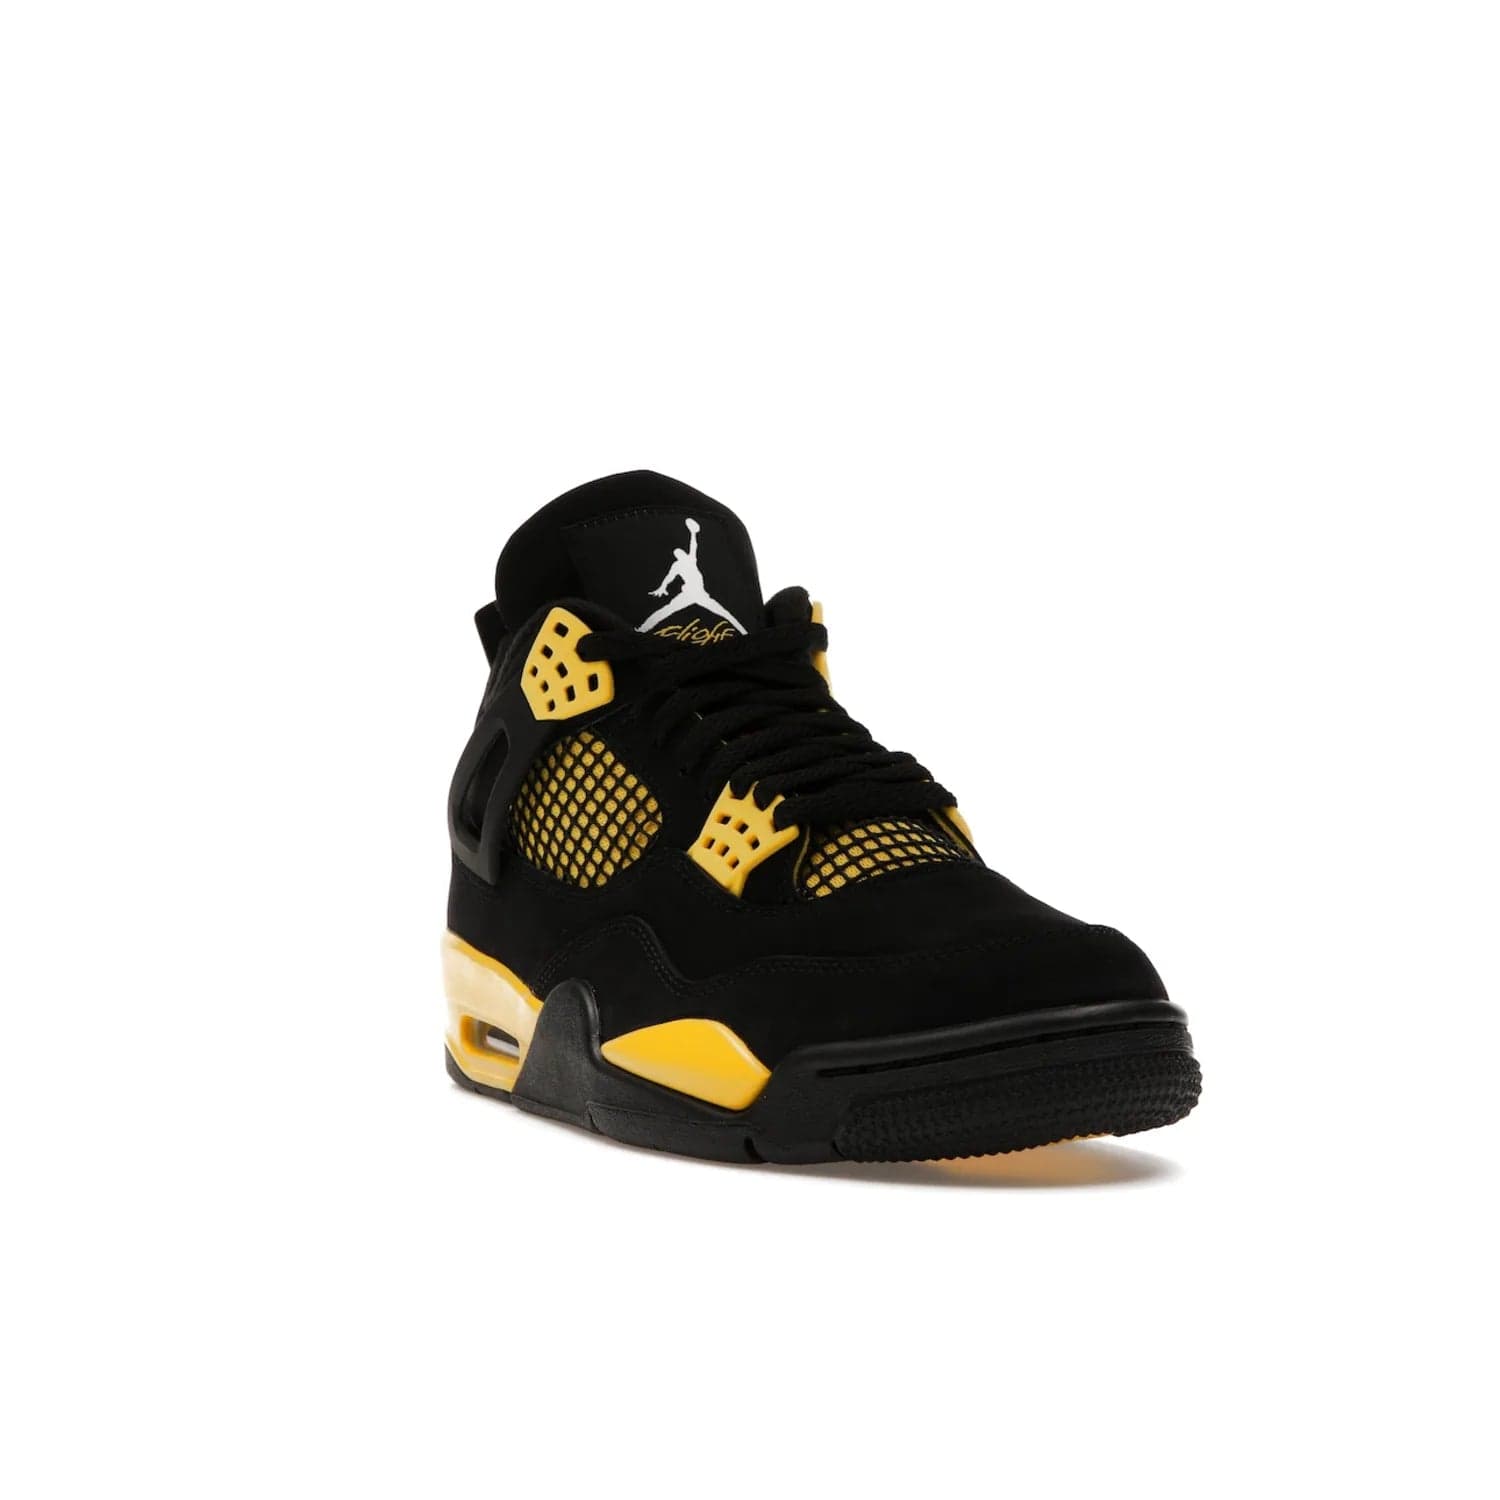 Jordan 4 Retro Thunder (2023) - Image 7 - Only at www.BallersClubKickz.com - Iconic Air Jordan 4 Retro Thunder (2023) returns with black nubuck upper and Tour Yellow details. Featuring Jumpman logo on heel tab, tongue and insoles. Dropping May 13th, 2023.